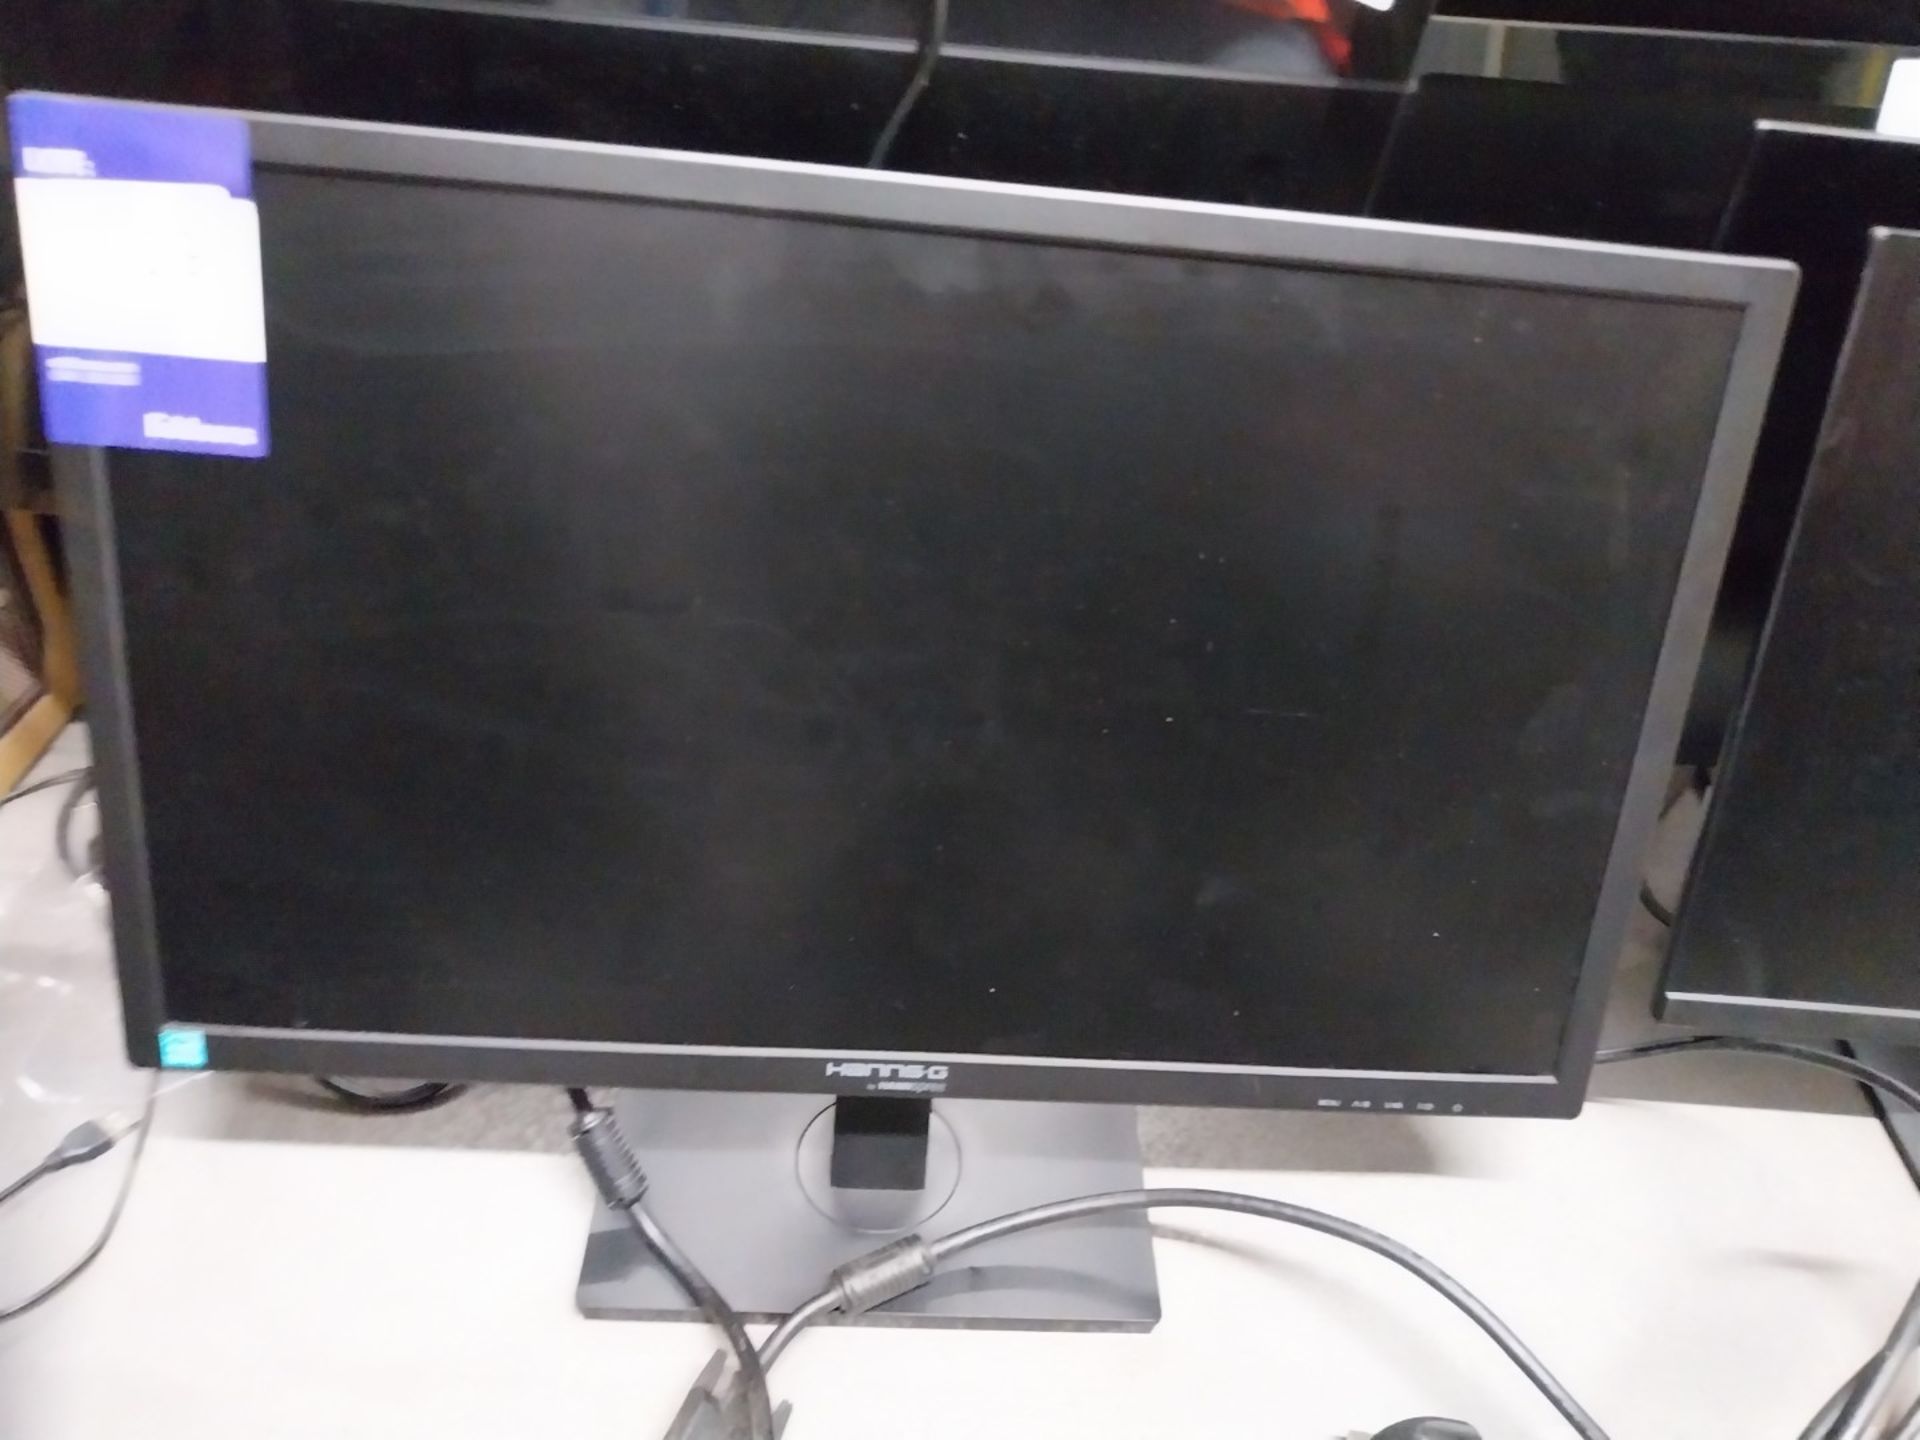 Hannspree Hanns-G LCD Monitor, HE247DDB (located in Leeds)